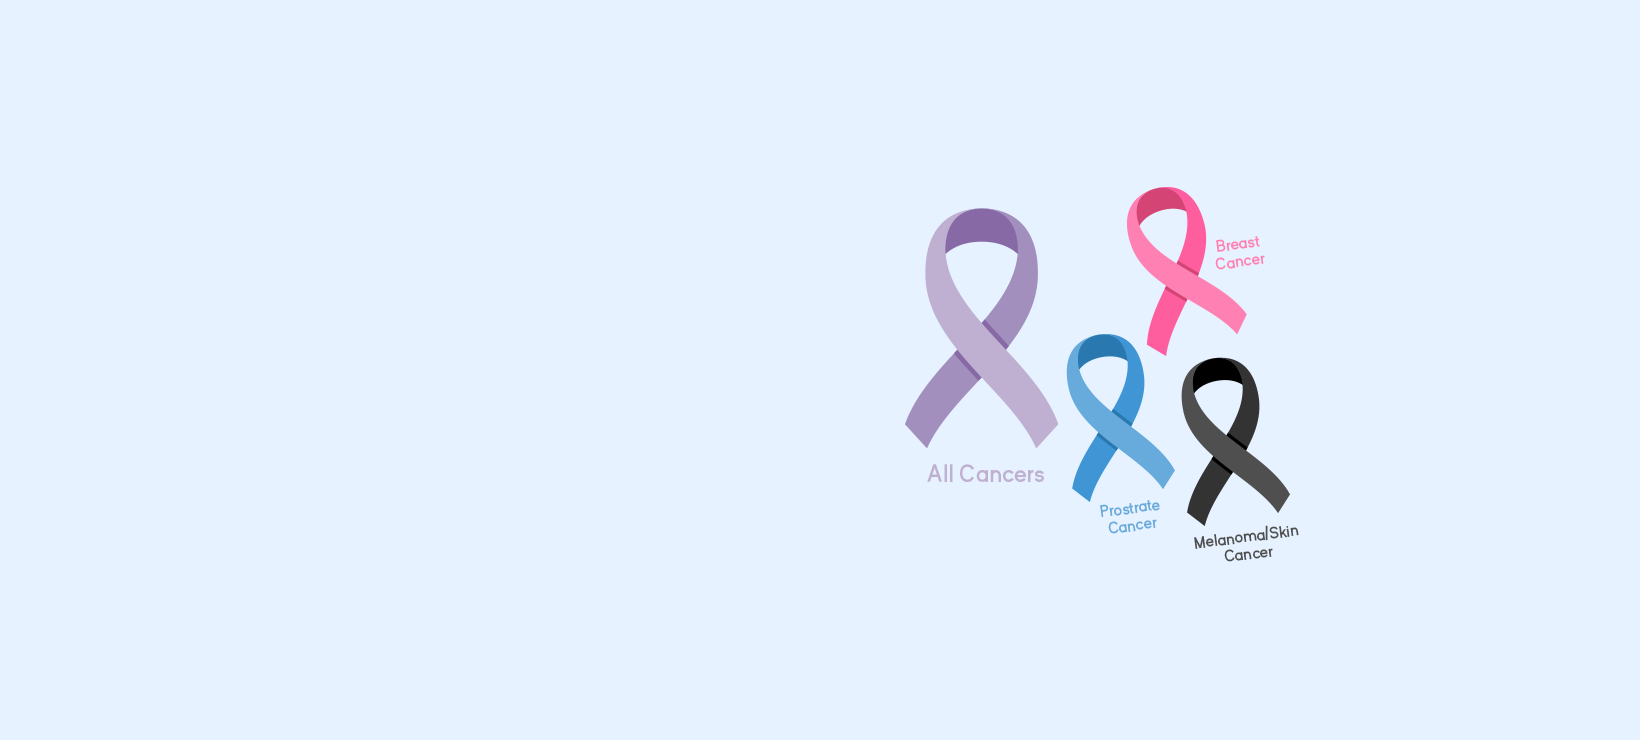 3 Common Types of Cancer in Australia